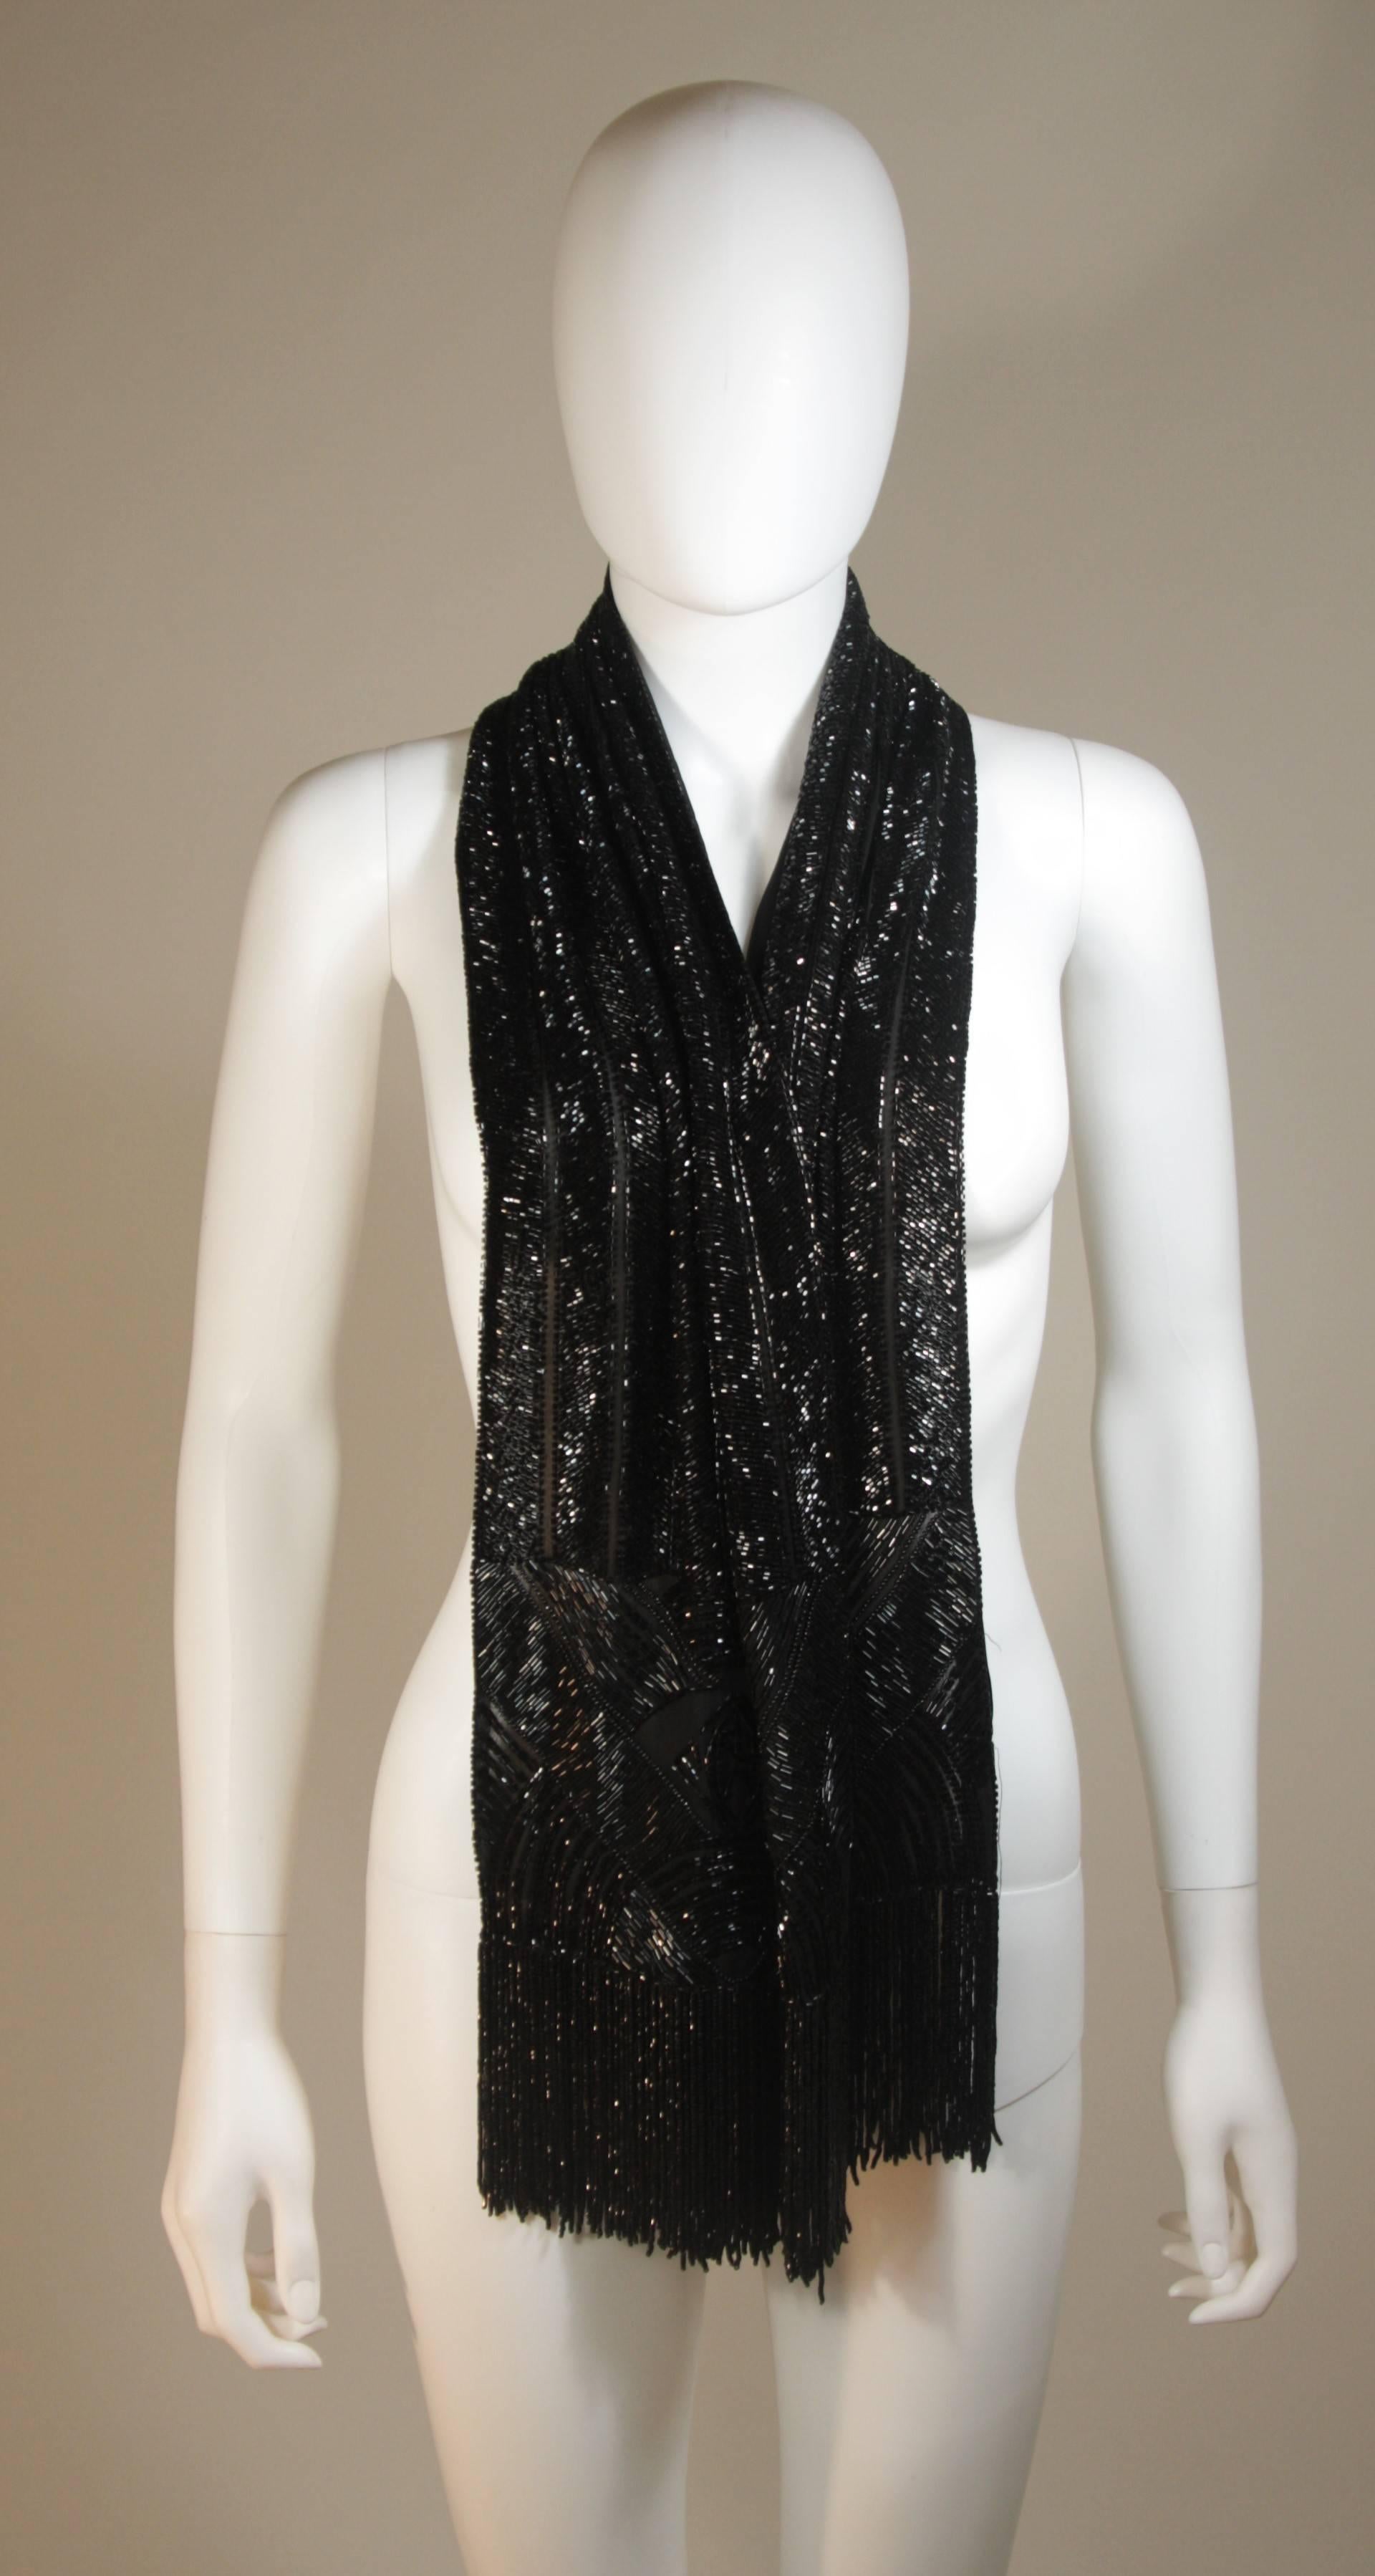 This Ralph Lauren scarf is composed of a beaded black silk with fringe. In excellent condition, comes with original box.

**Please cross-reference measurements for personal accuracy. 

Measurements (Approximately)  
Length: 62